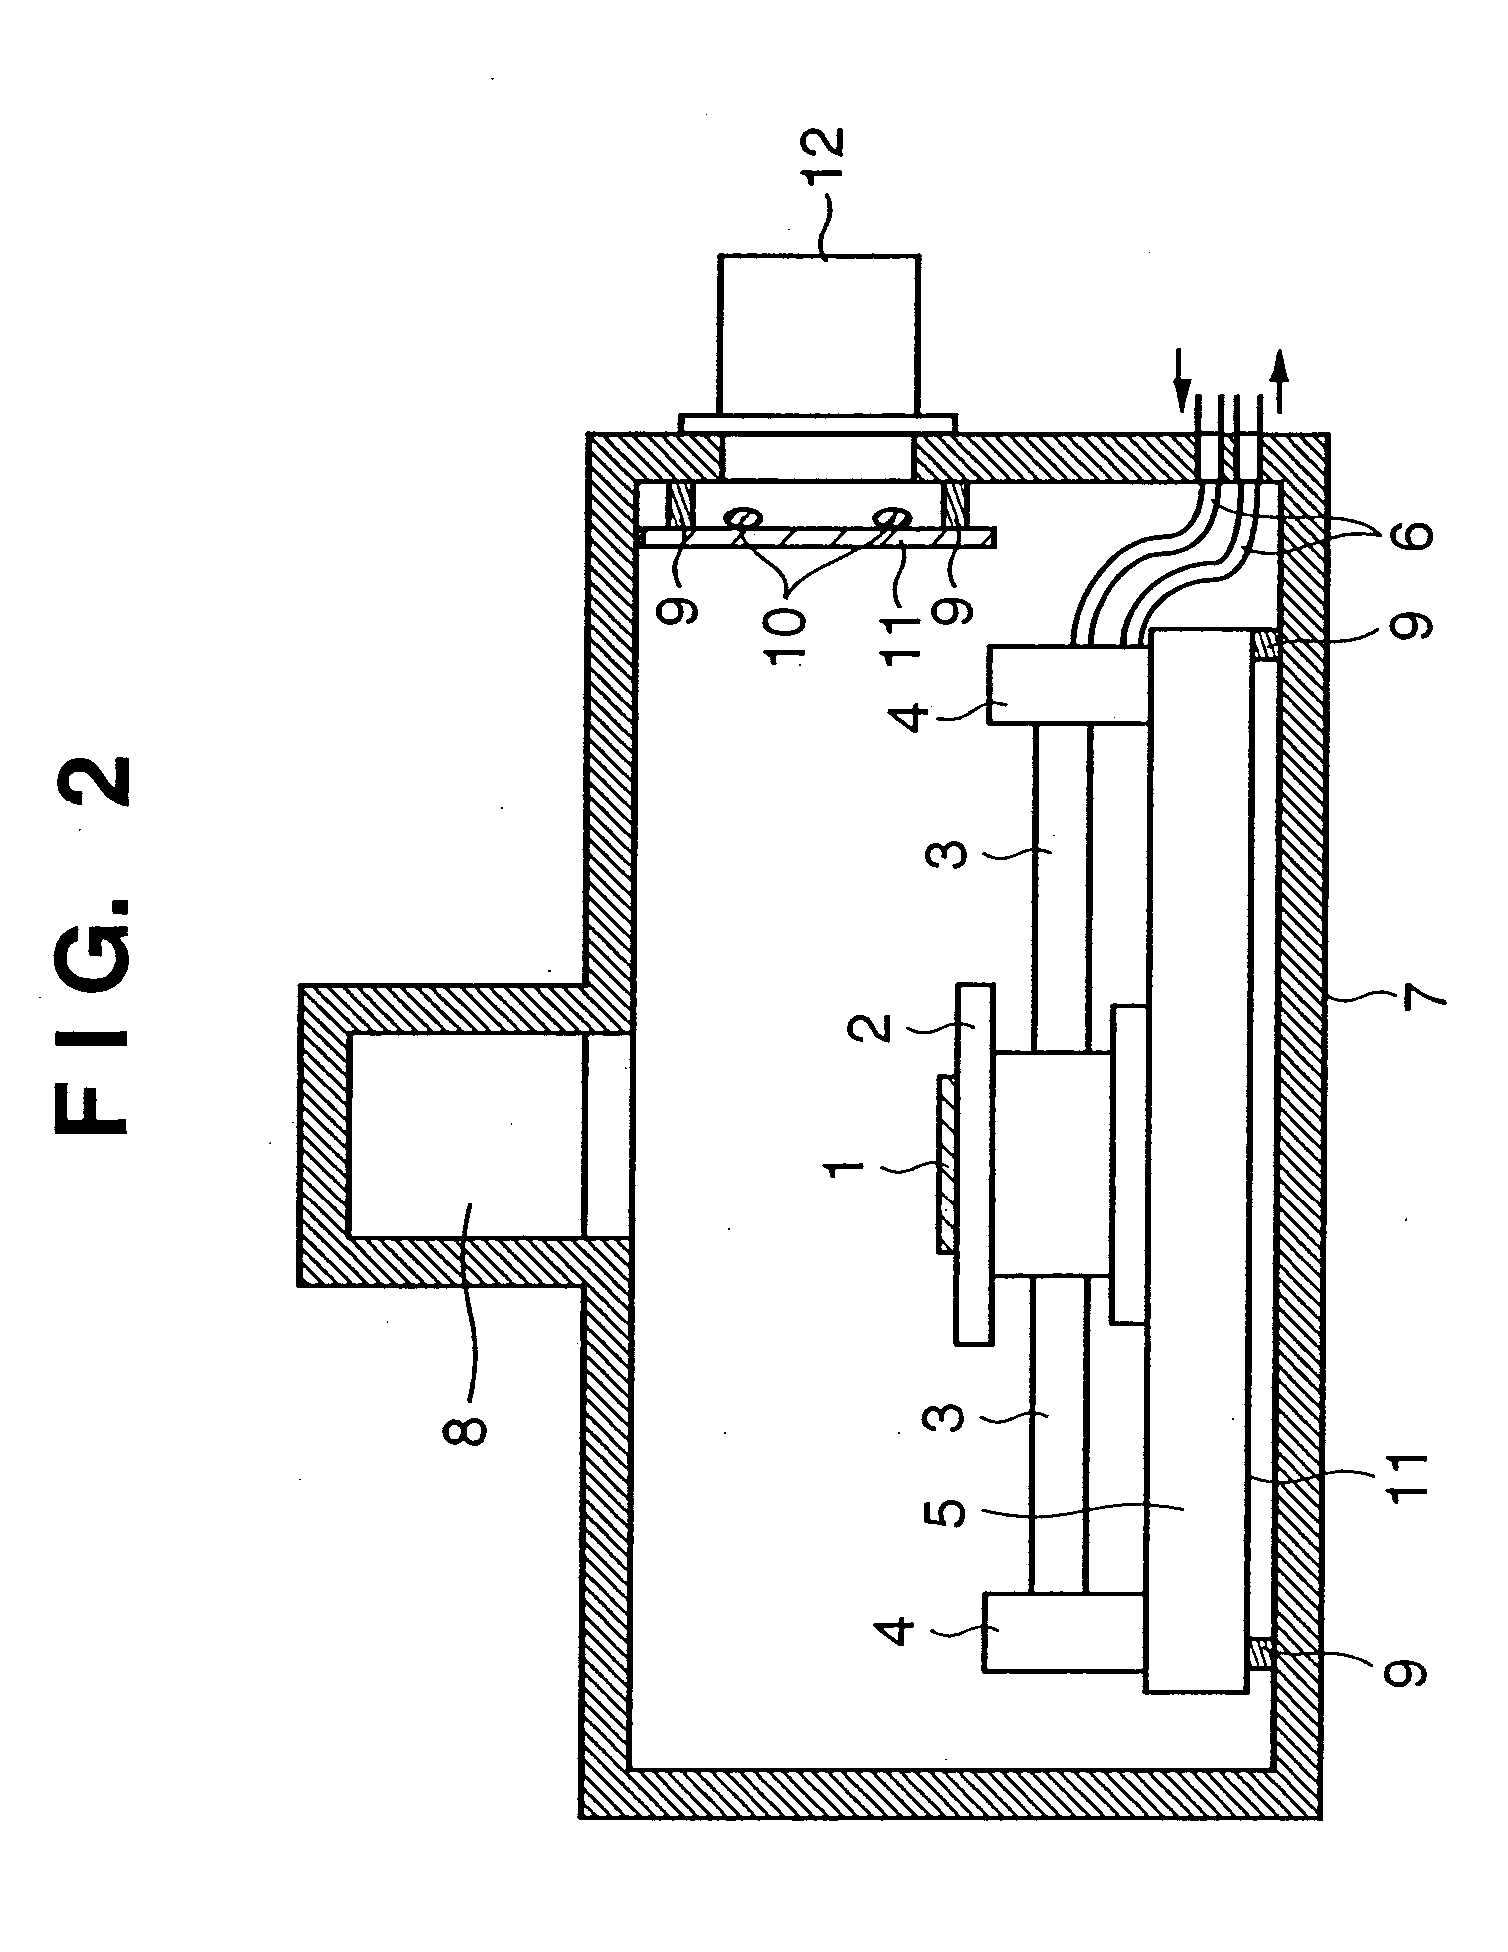 Processing apparatus for processing object in vessel